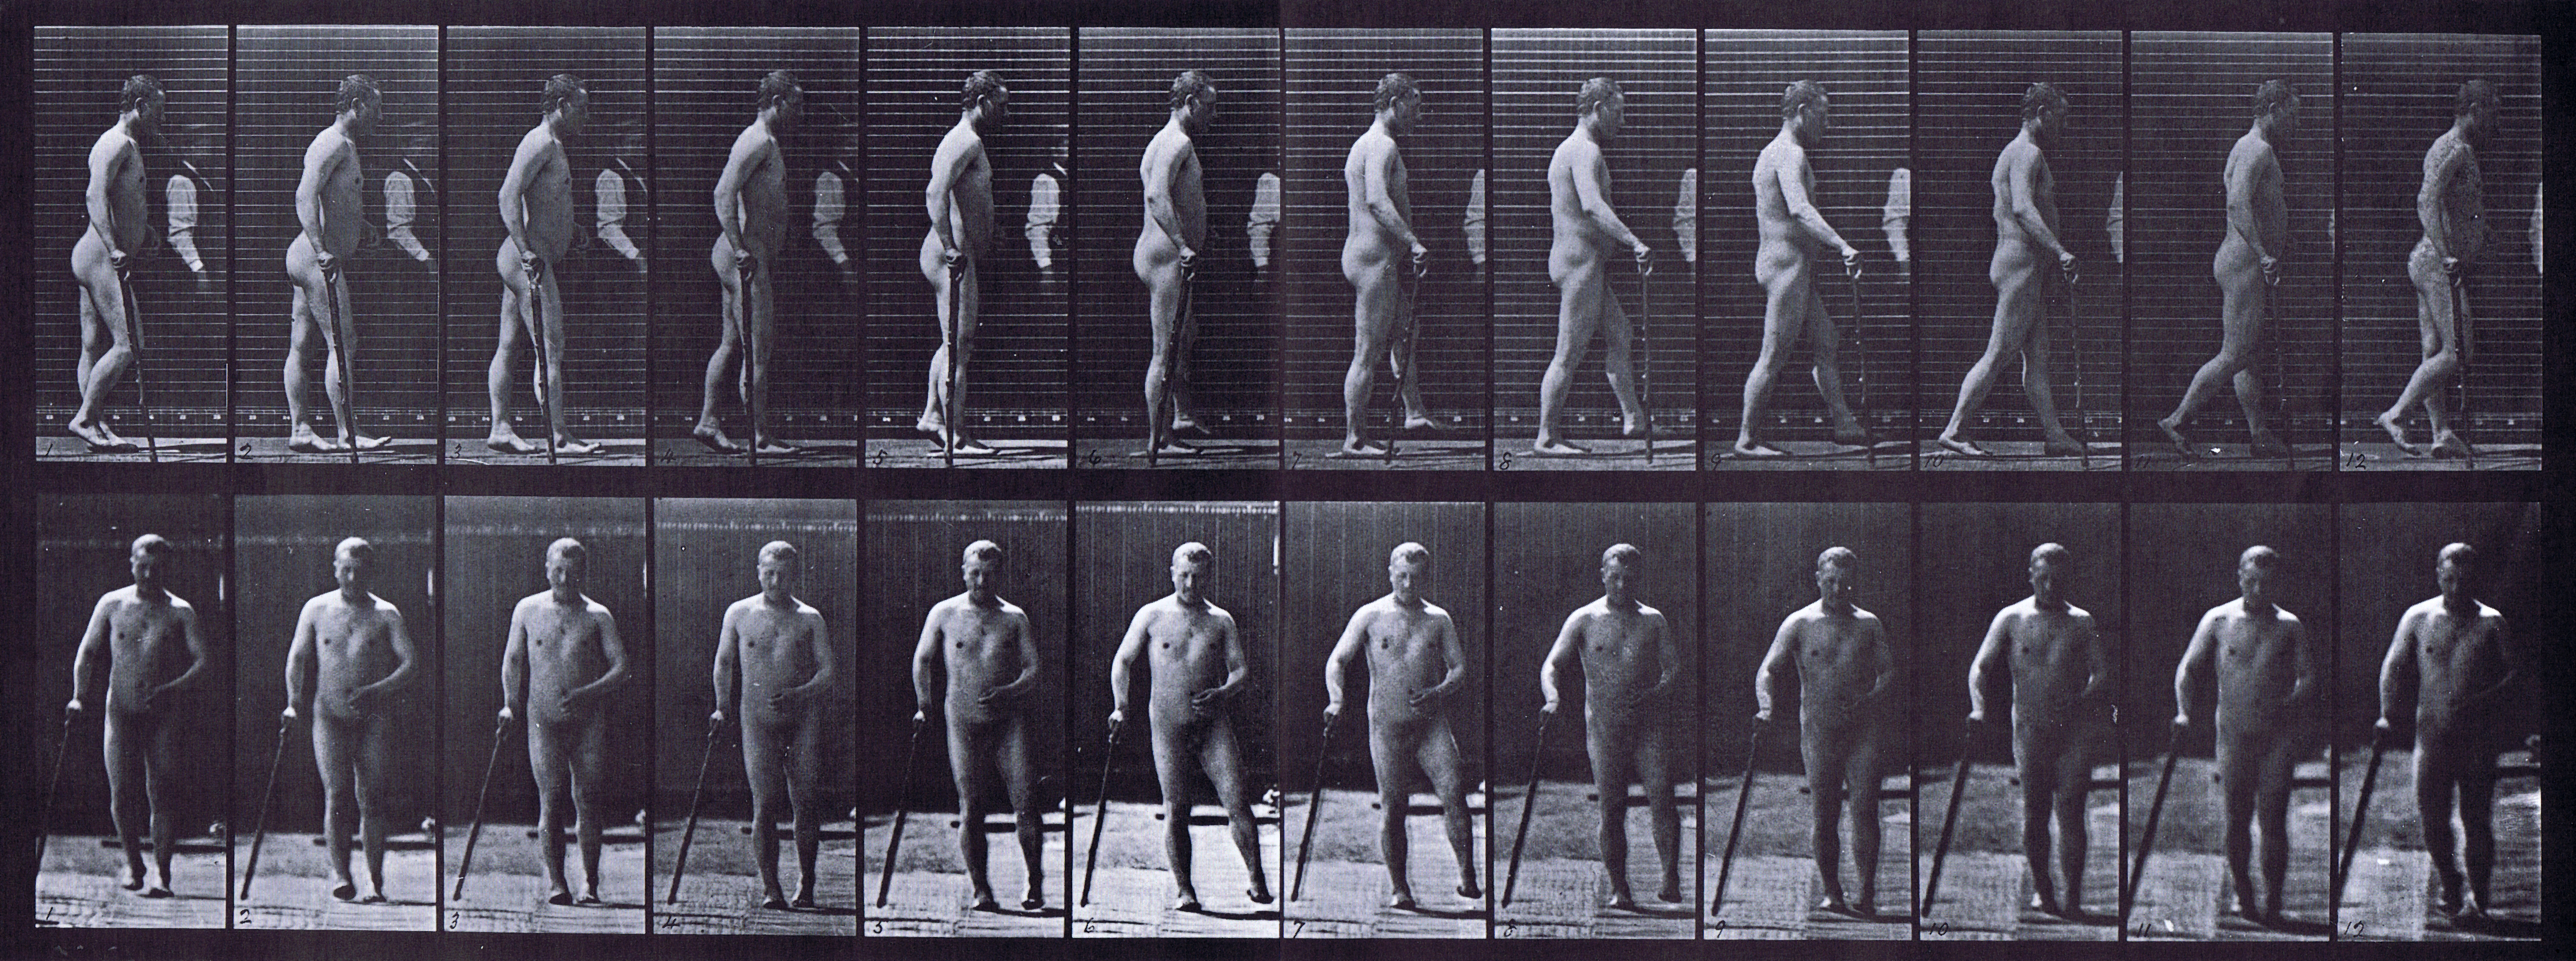 large profile and front views of nude male spastic walking with a cane animation reference using muybridge plate 552 from animal locomotion